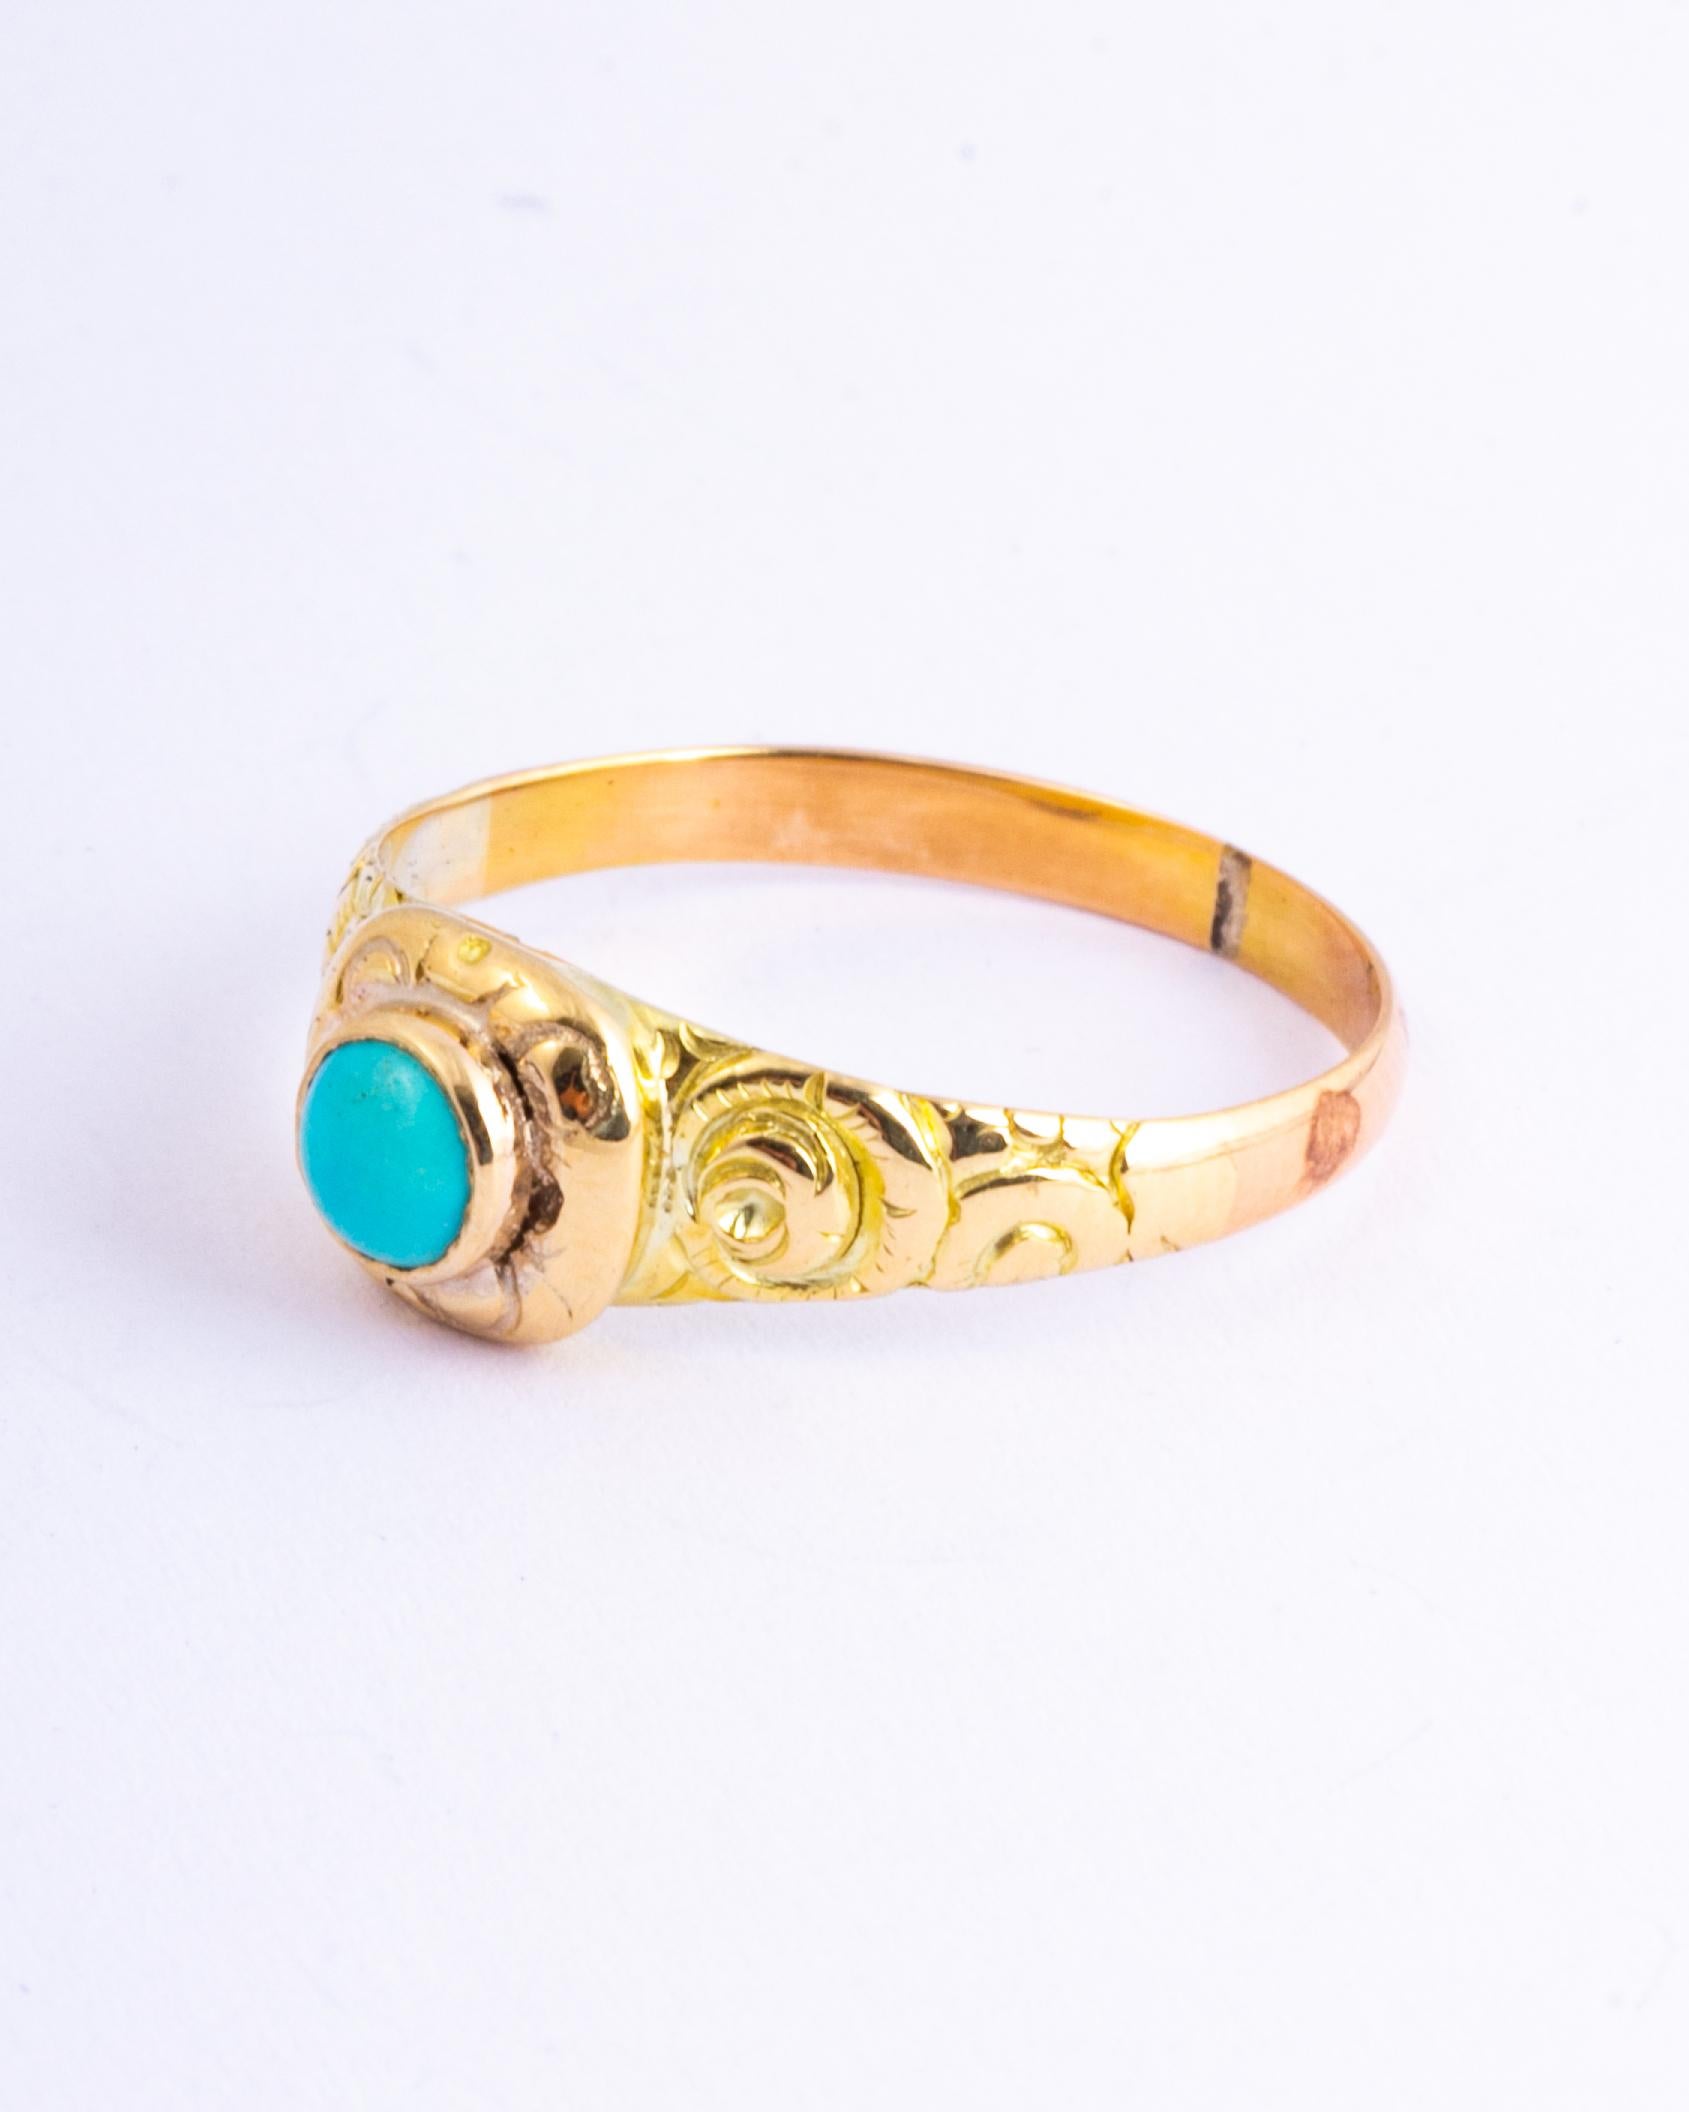 The central stone is set within an engraved setting and either side of this turquoise there are engraved shoulders. 

Ring Size: P or 7 1/2 
Widest Point: 7mm 
Height Off Finger: 5mm

Weight: 2.29g